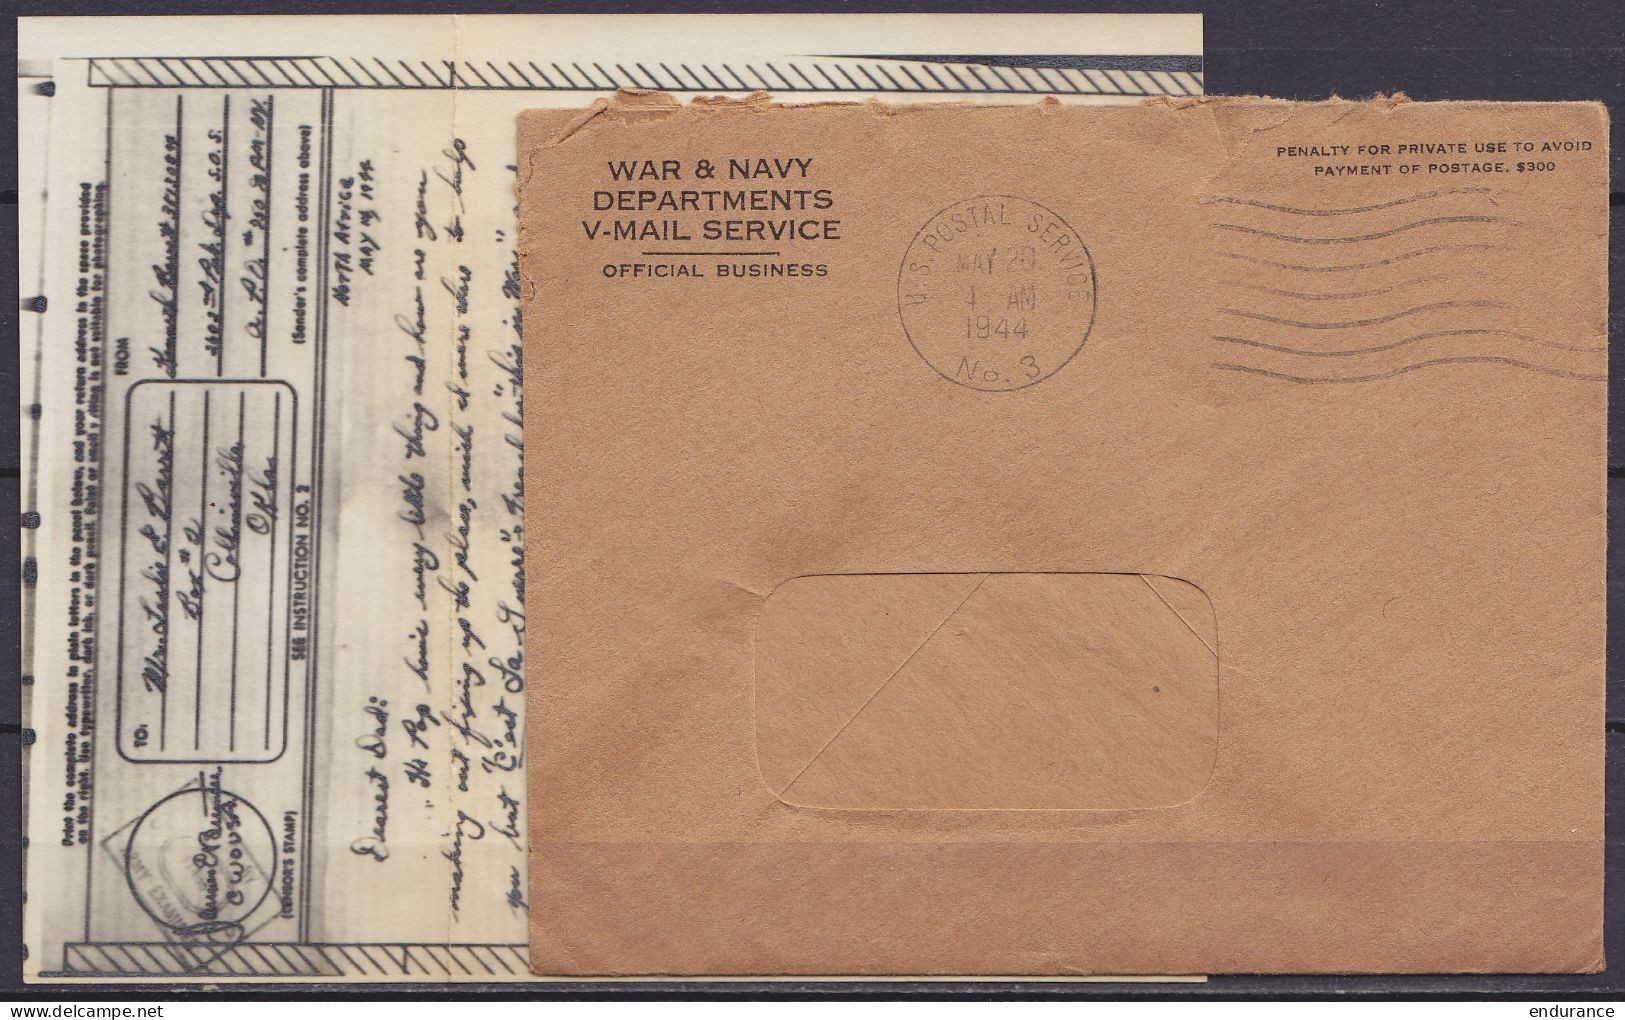 USA - V-MAIL WAR & NAVY DEPARTMENT Flam. "U.S. POSTAL SERVICE /MAY 20 1944" Pour COLINSVILLE Oklahoma - Covers & Documents